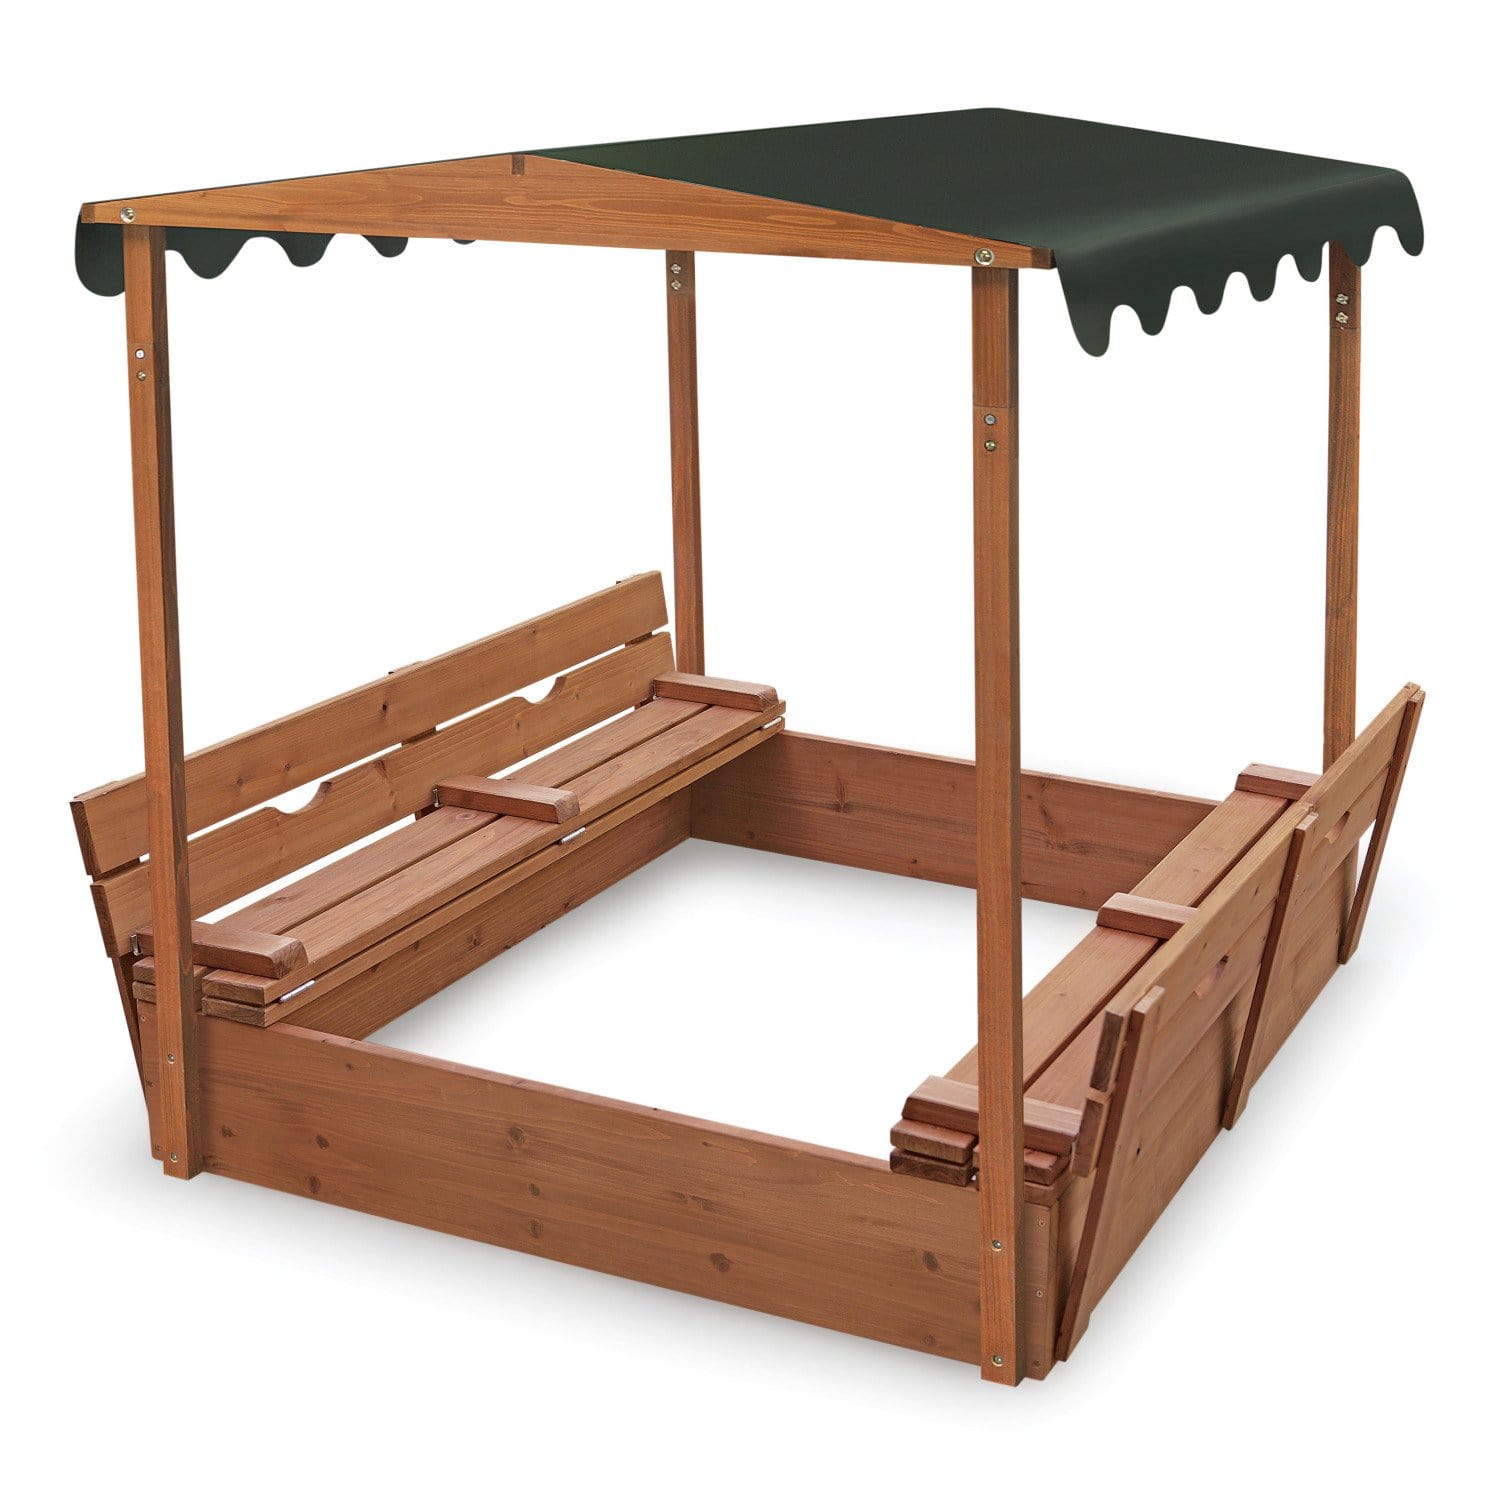 Buy Badger Basket Convertible Sandbox with Canopy & Benches Online – Buy  Kids Playhouse